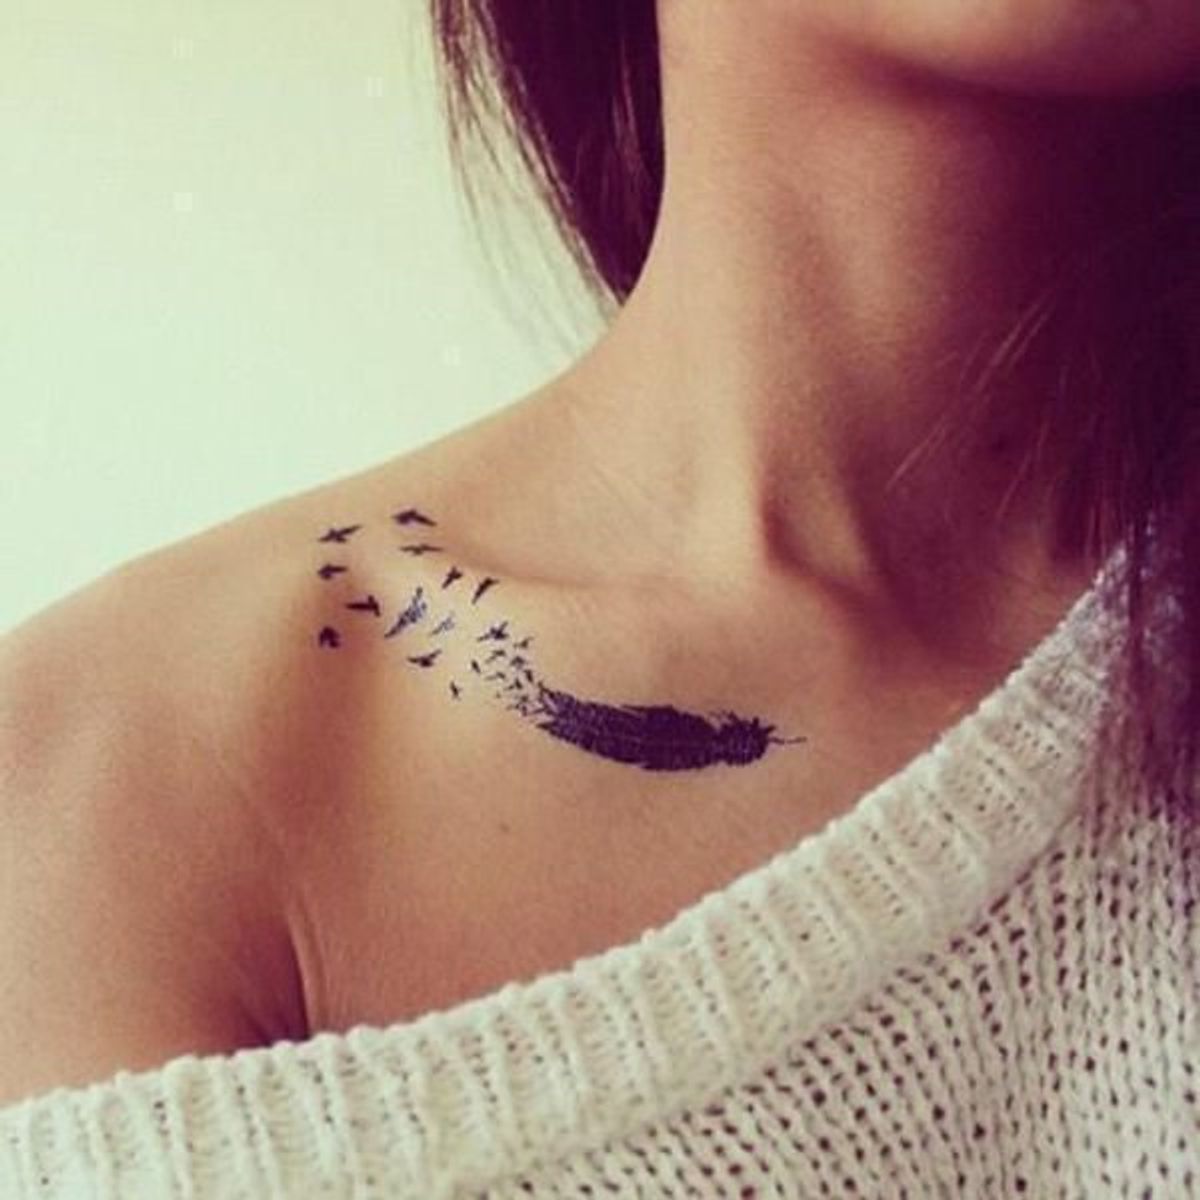 10 Things People with Tattoos are Tired of Hearing